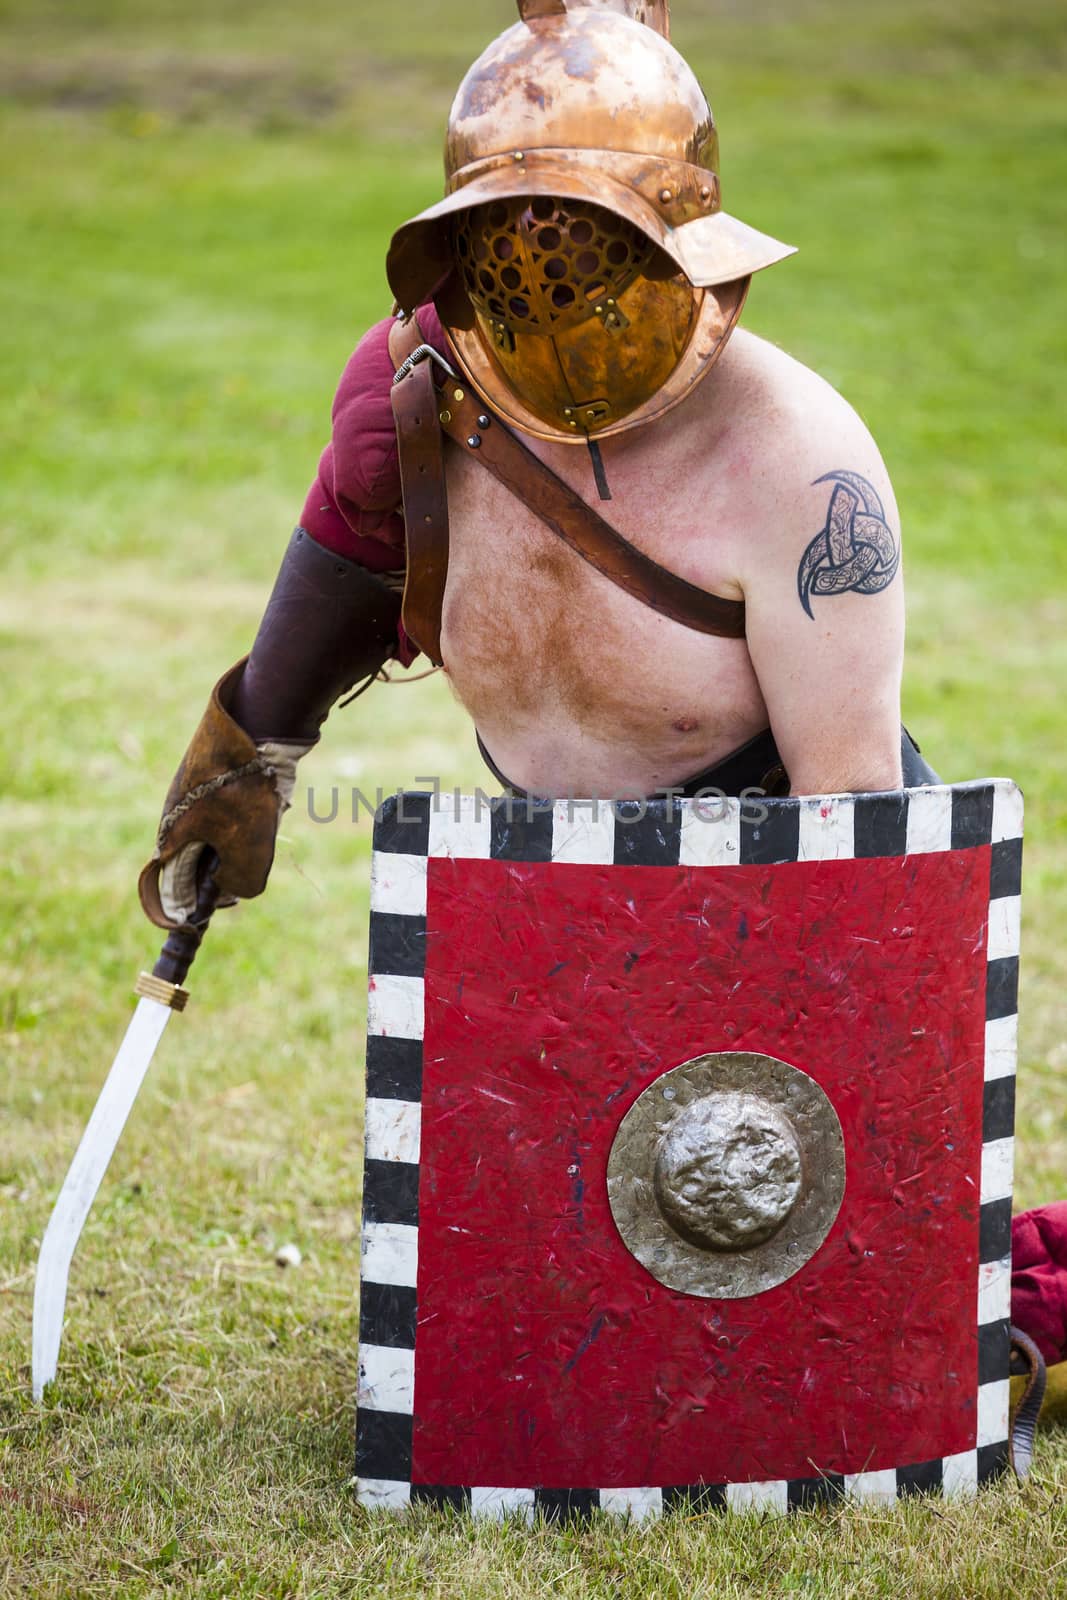 CALGARY CANADA JUN 13 2015:  The Military Museum organized "Summer Skirmish" event where an unidentified soldier is seen  in a historical Reenactment Battle. Gladiator fight.